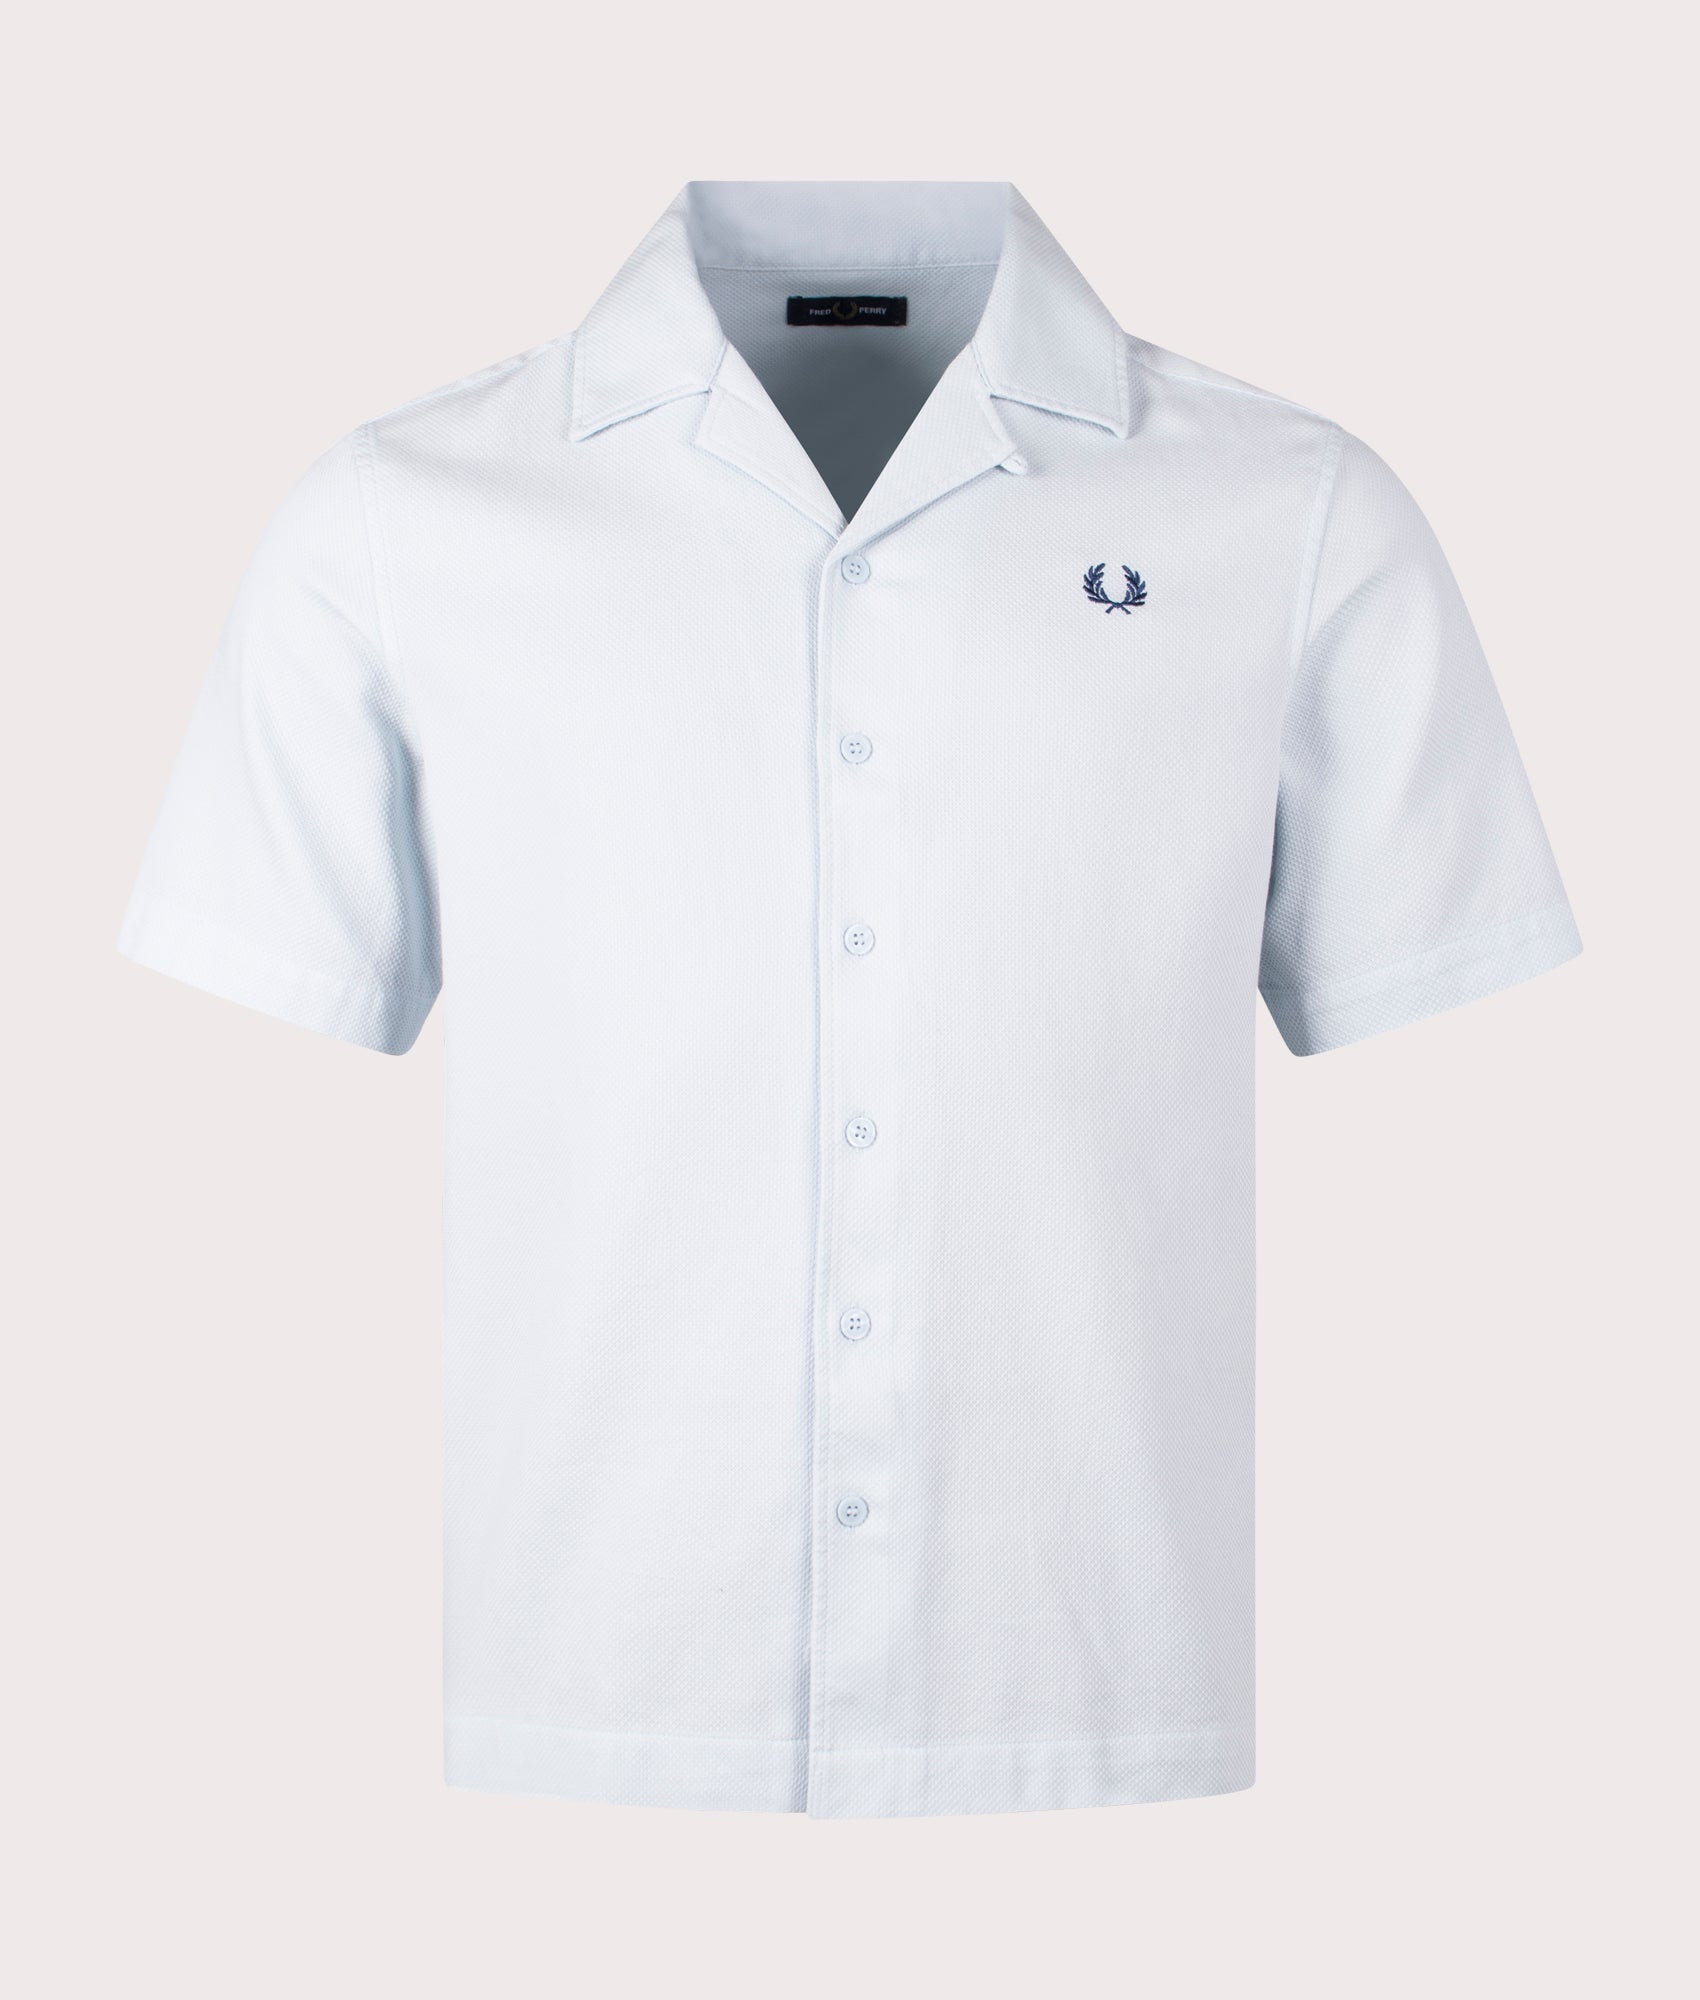 Fred Perry Mens Pique Texture Revere Collar Shirt - Colour: R30 Light Ice - Size: Large